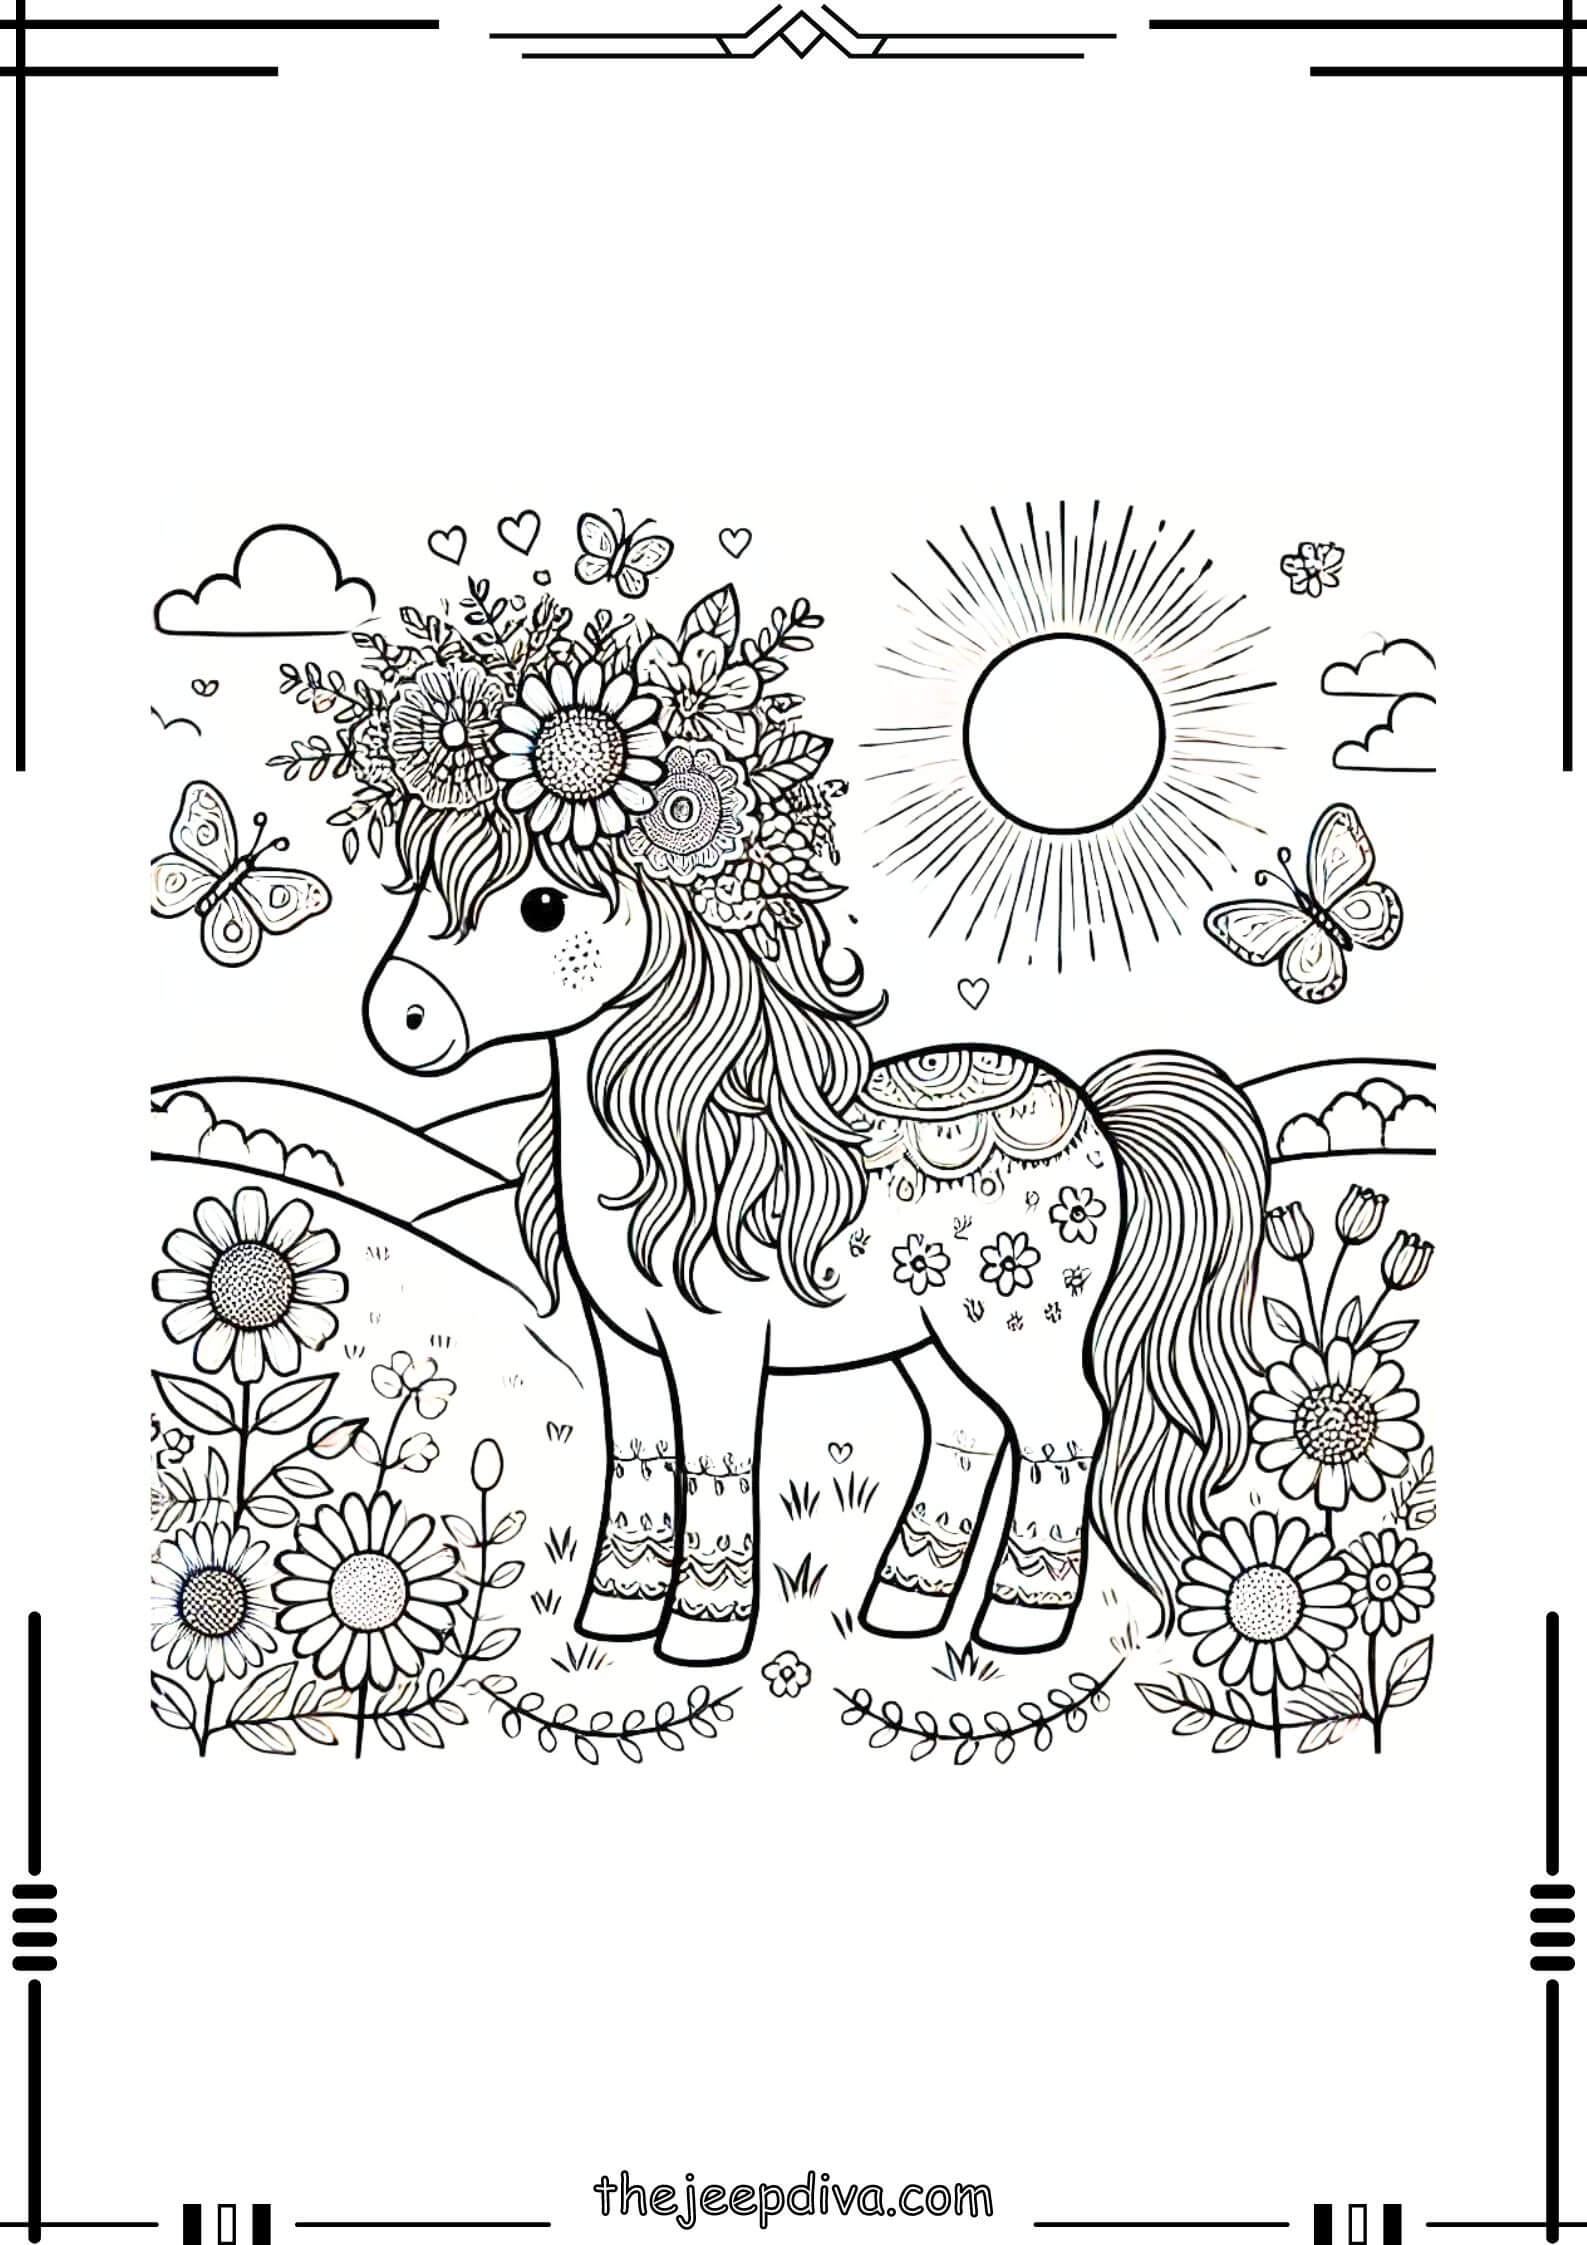 Horse-Colouring-Pages-Medium-24